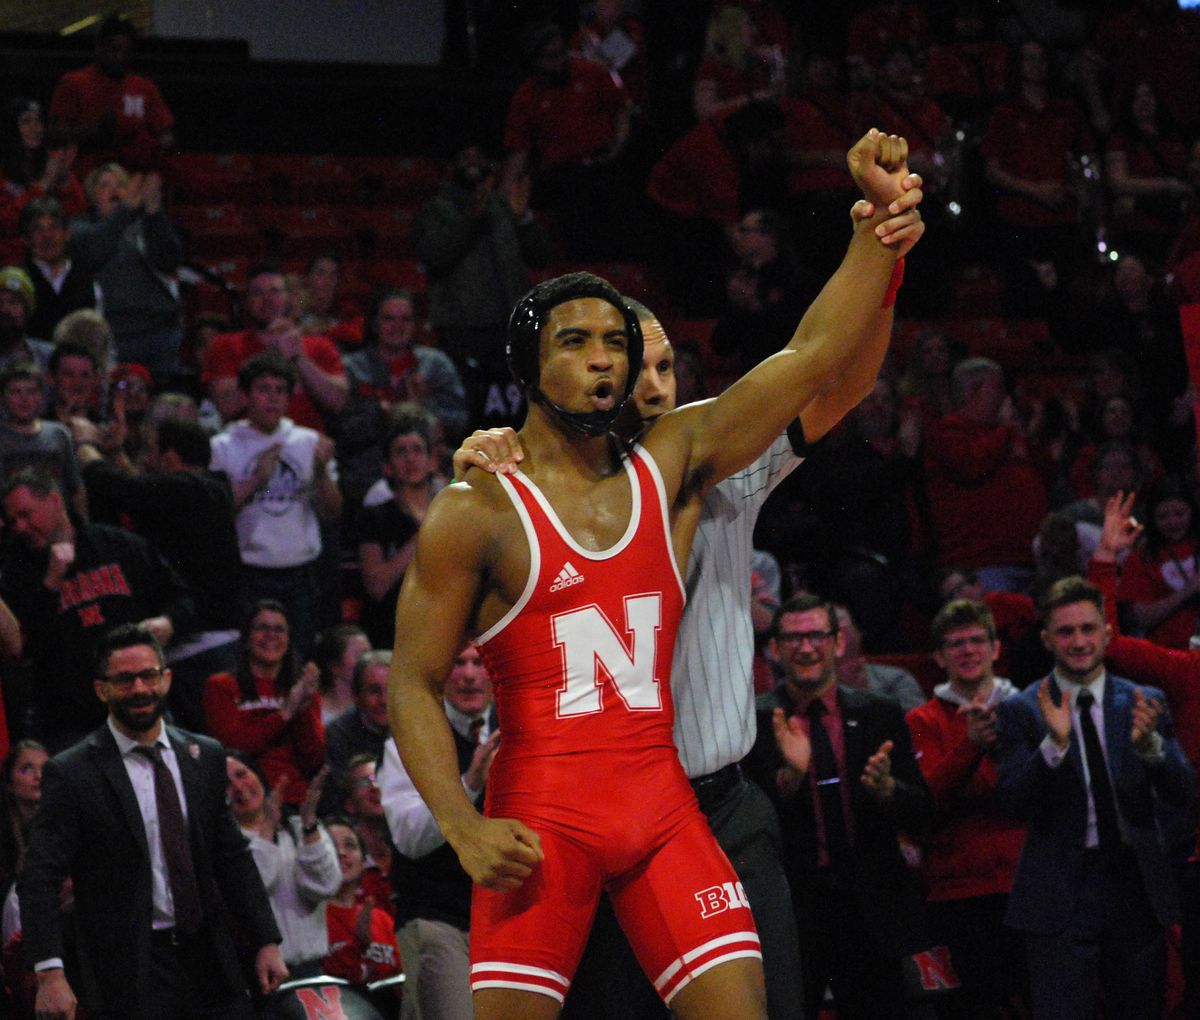 Nebraska competing in a dual against Michigan on Feb. 14, 2020 at the Bob Devaney Sports Center.